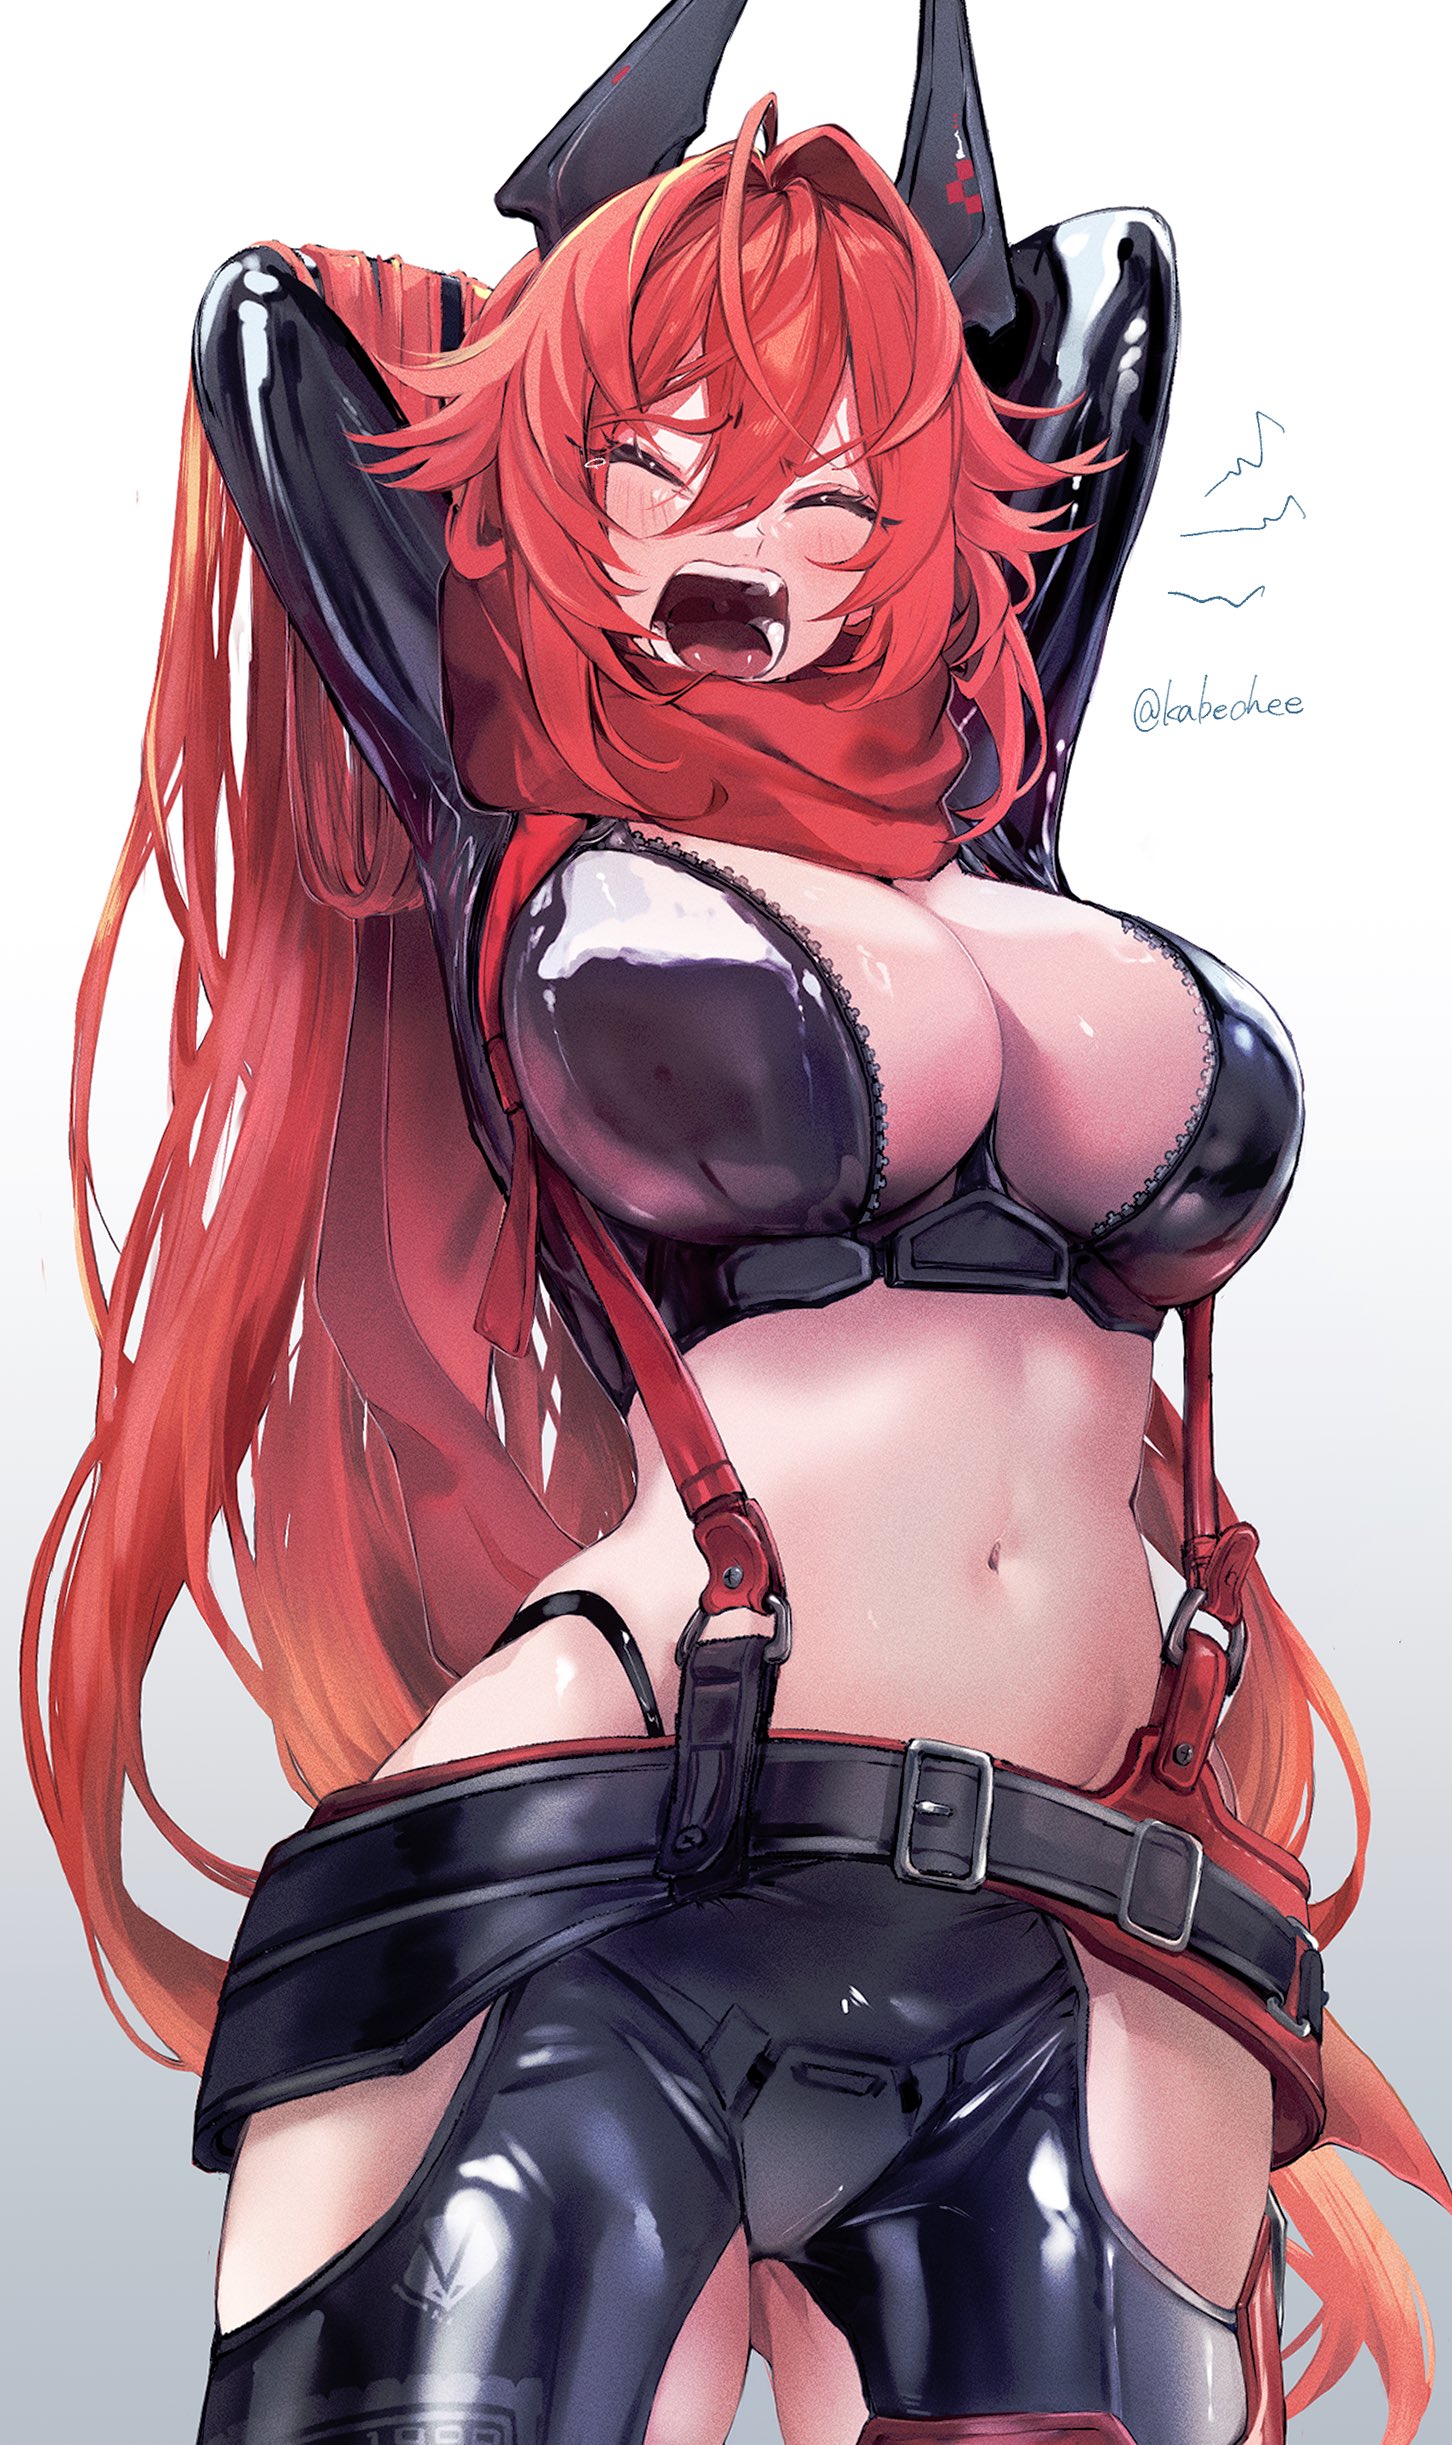 Anime 1452x2445 Nikke: The Goddess of Victory portrait display yawning Red Hood (Nikke) redhead arm(s) behind head scarf huge breasts leather pants  leather jacket open mouth suspenders red scarfs closed eyes stretching Chikabe unzipped long hair blushing